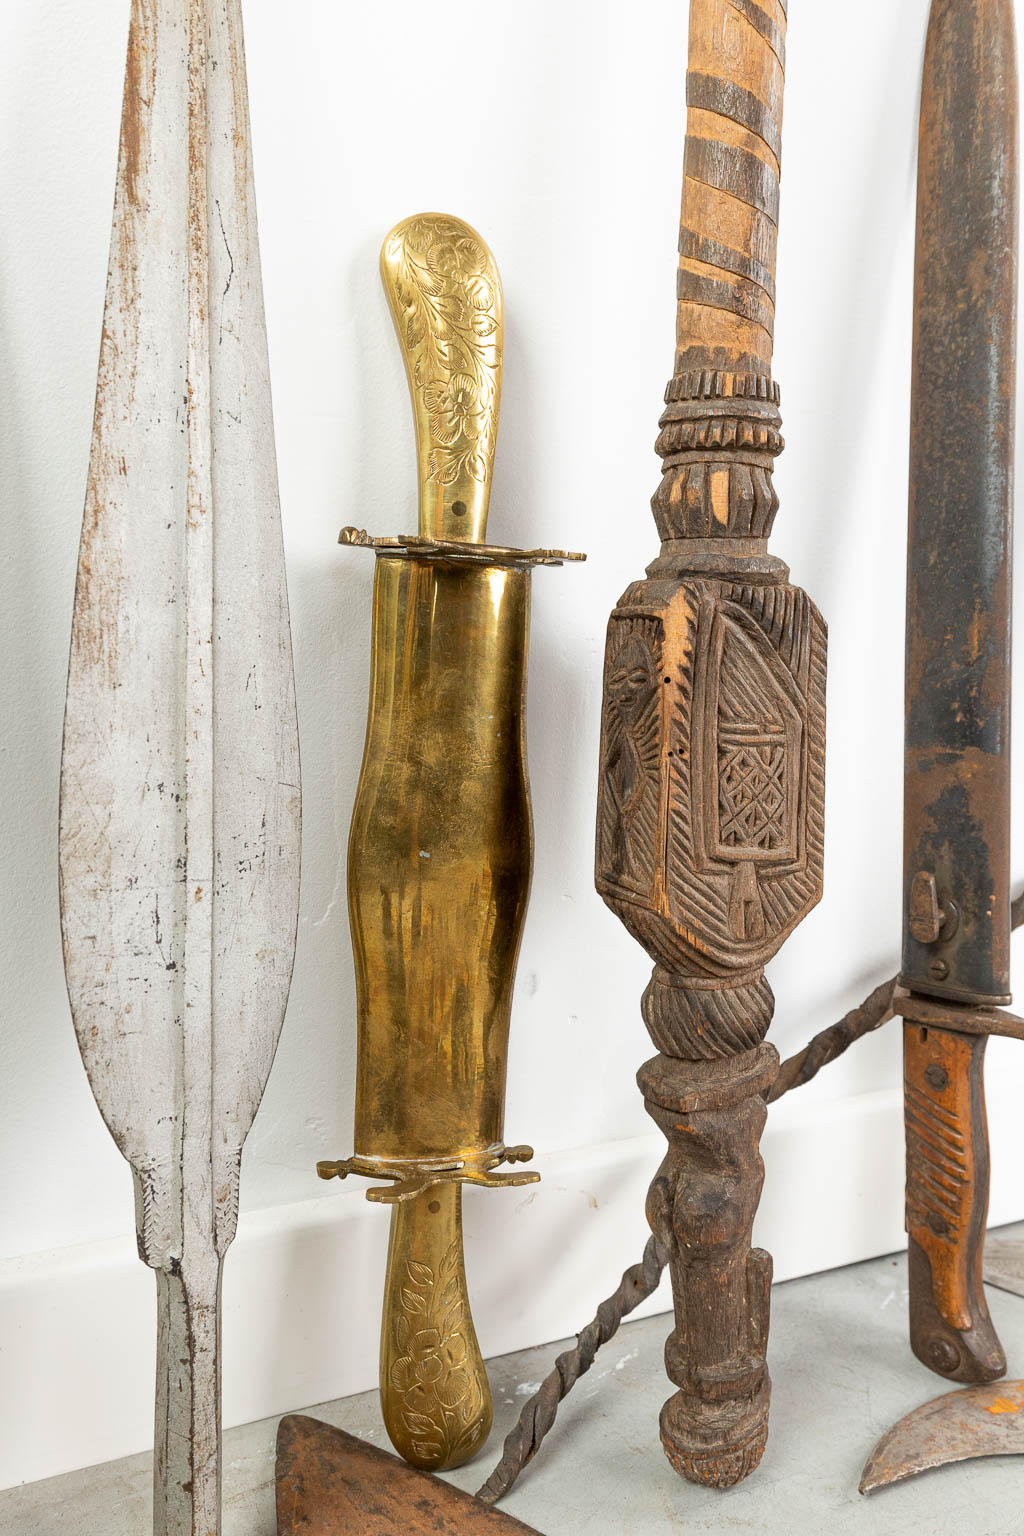 A large collection of knives made in Africa. (H:57cm)